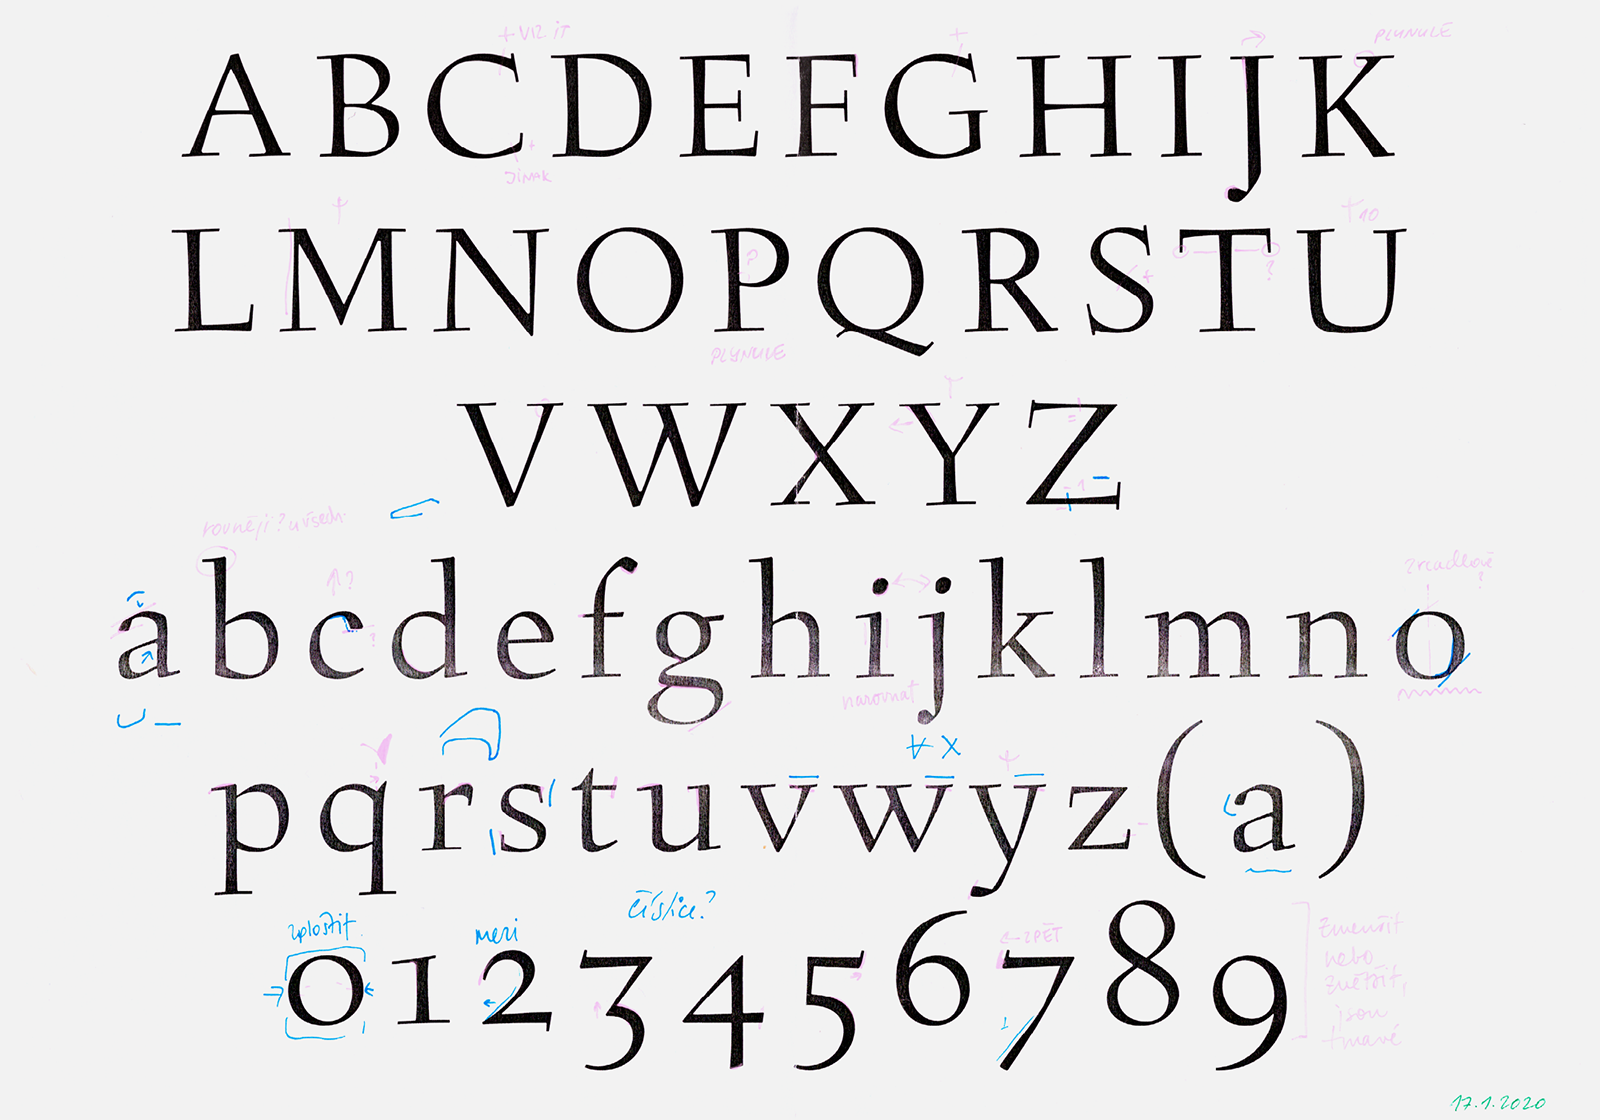 A series of corrections to the Figural typeface which led to researching and creating the so-called “authentic version.” The oldest revisions are dated December 10, 2018.